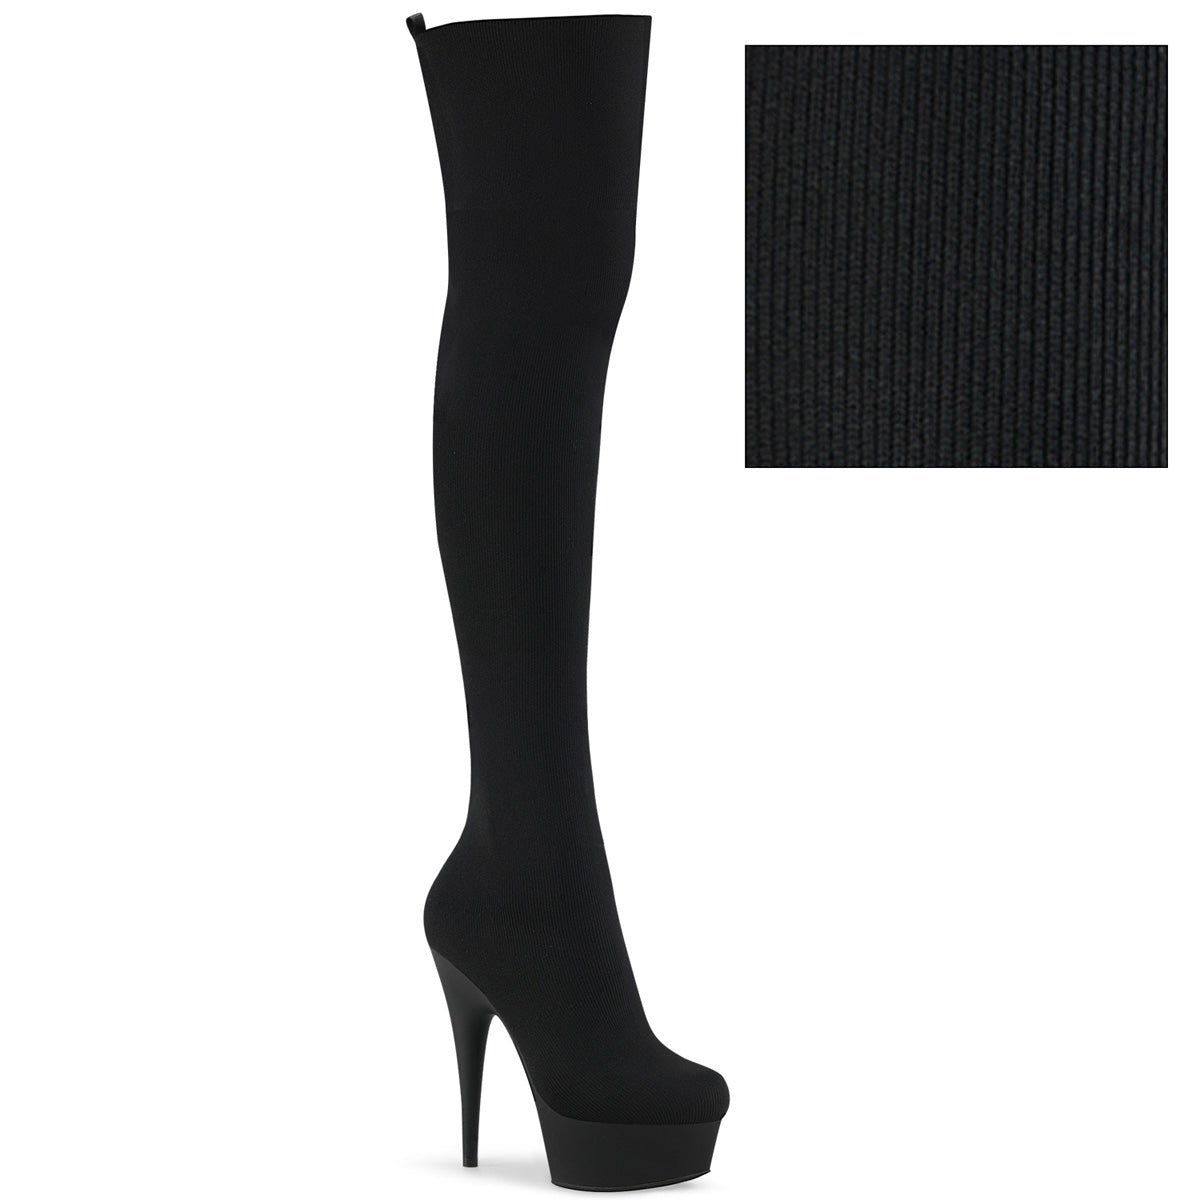 DELIGHT-3002-1 Black Thigh High Boots